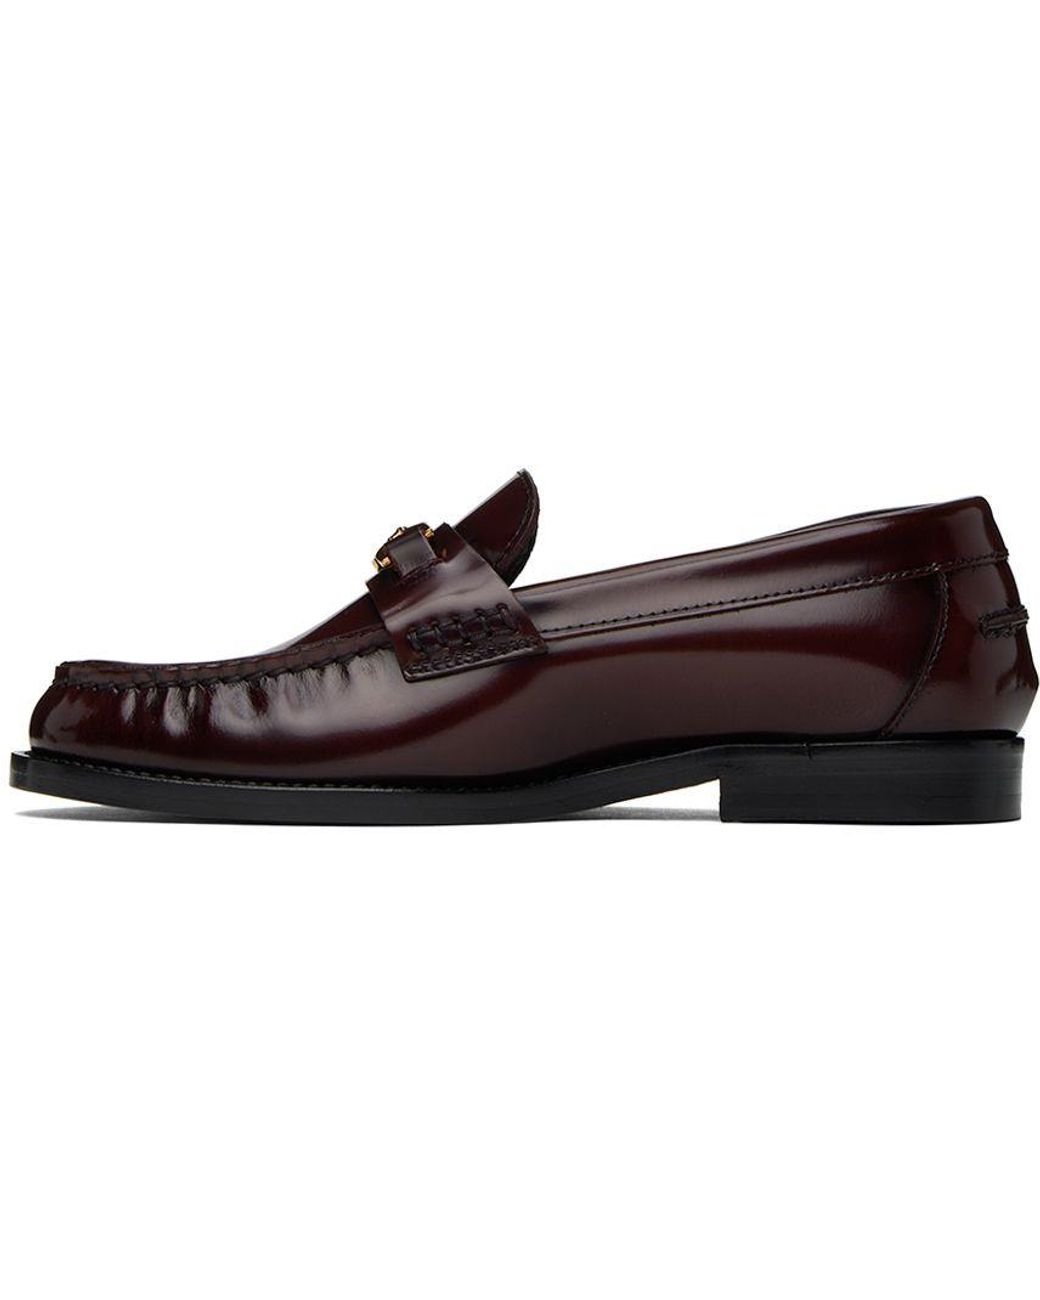 Stylish Versace Burgundy Suede Loafers